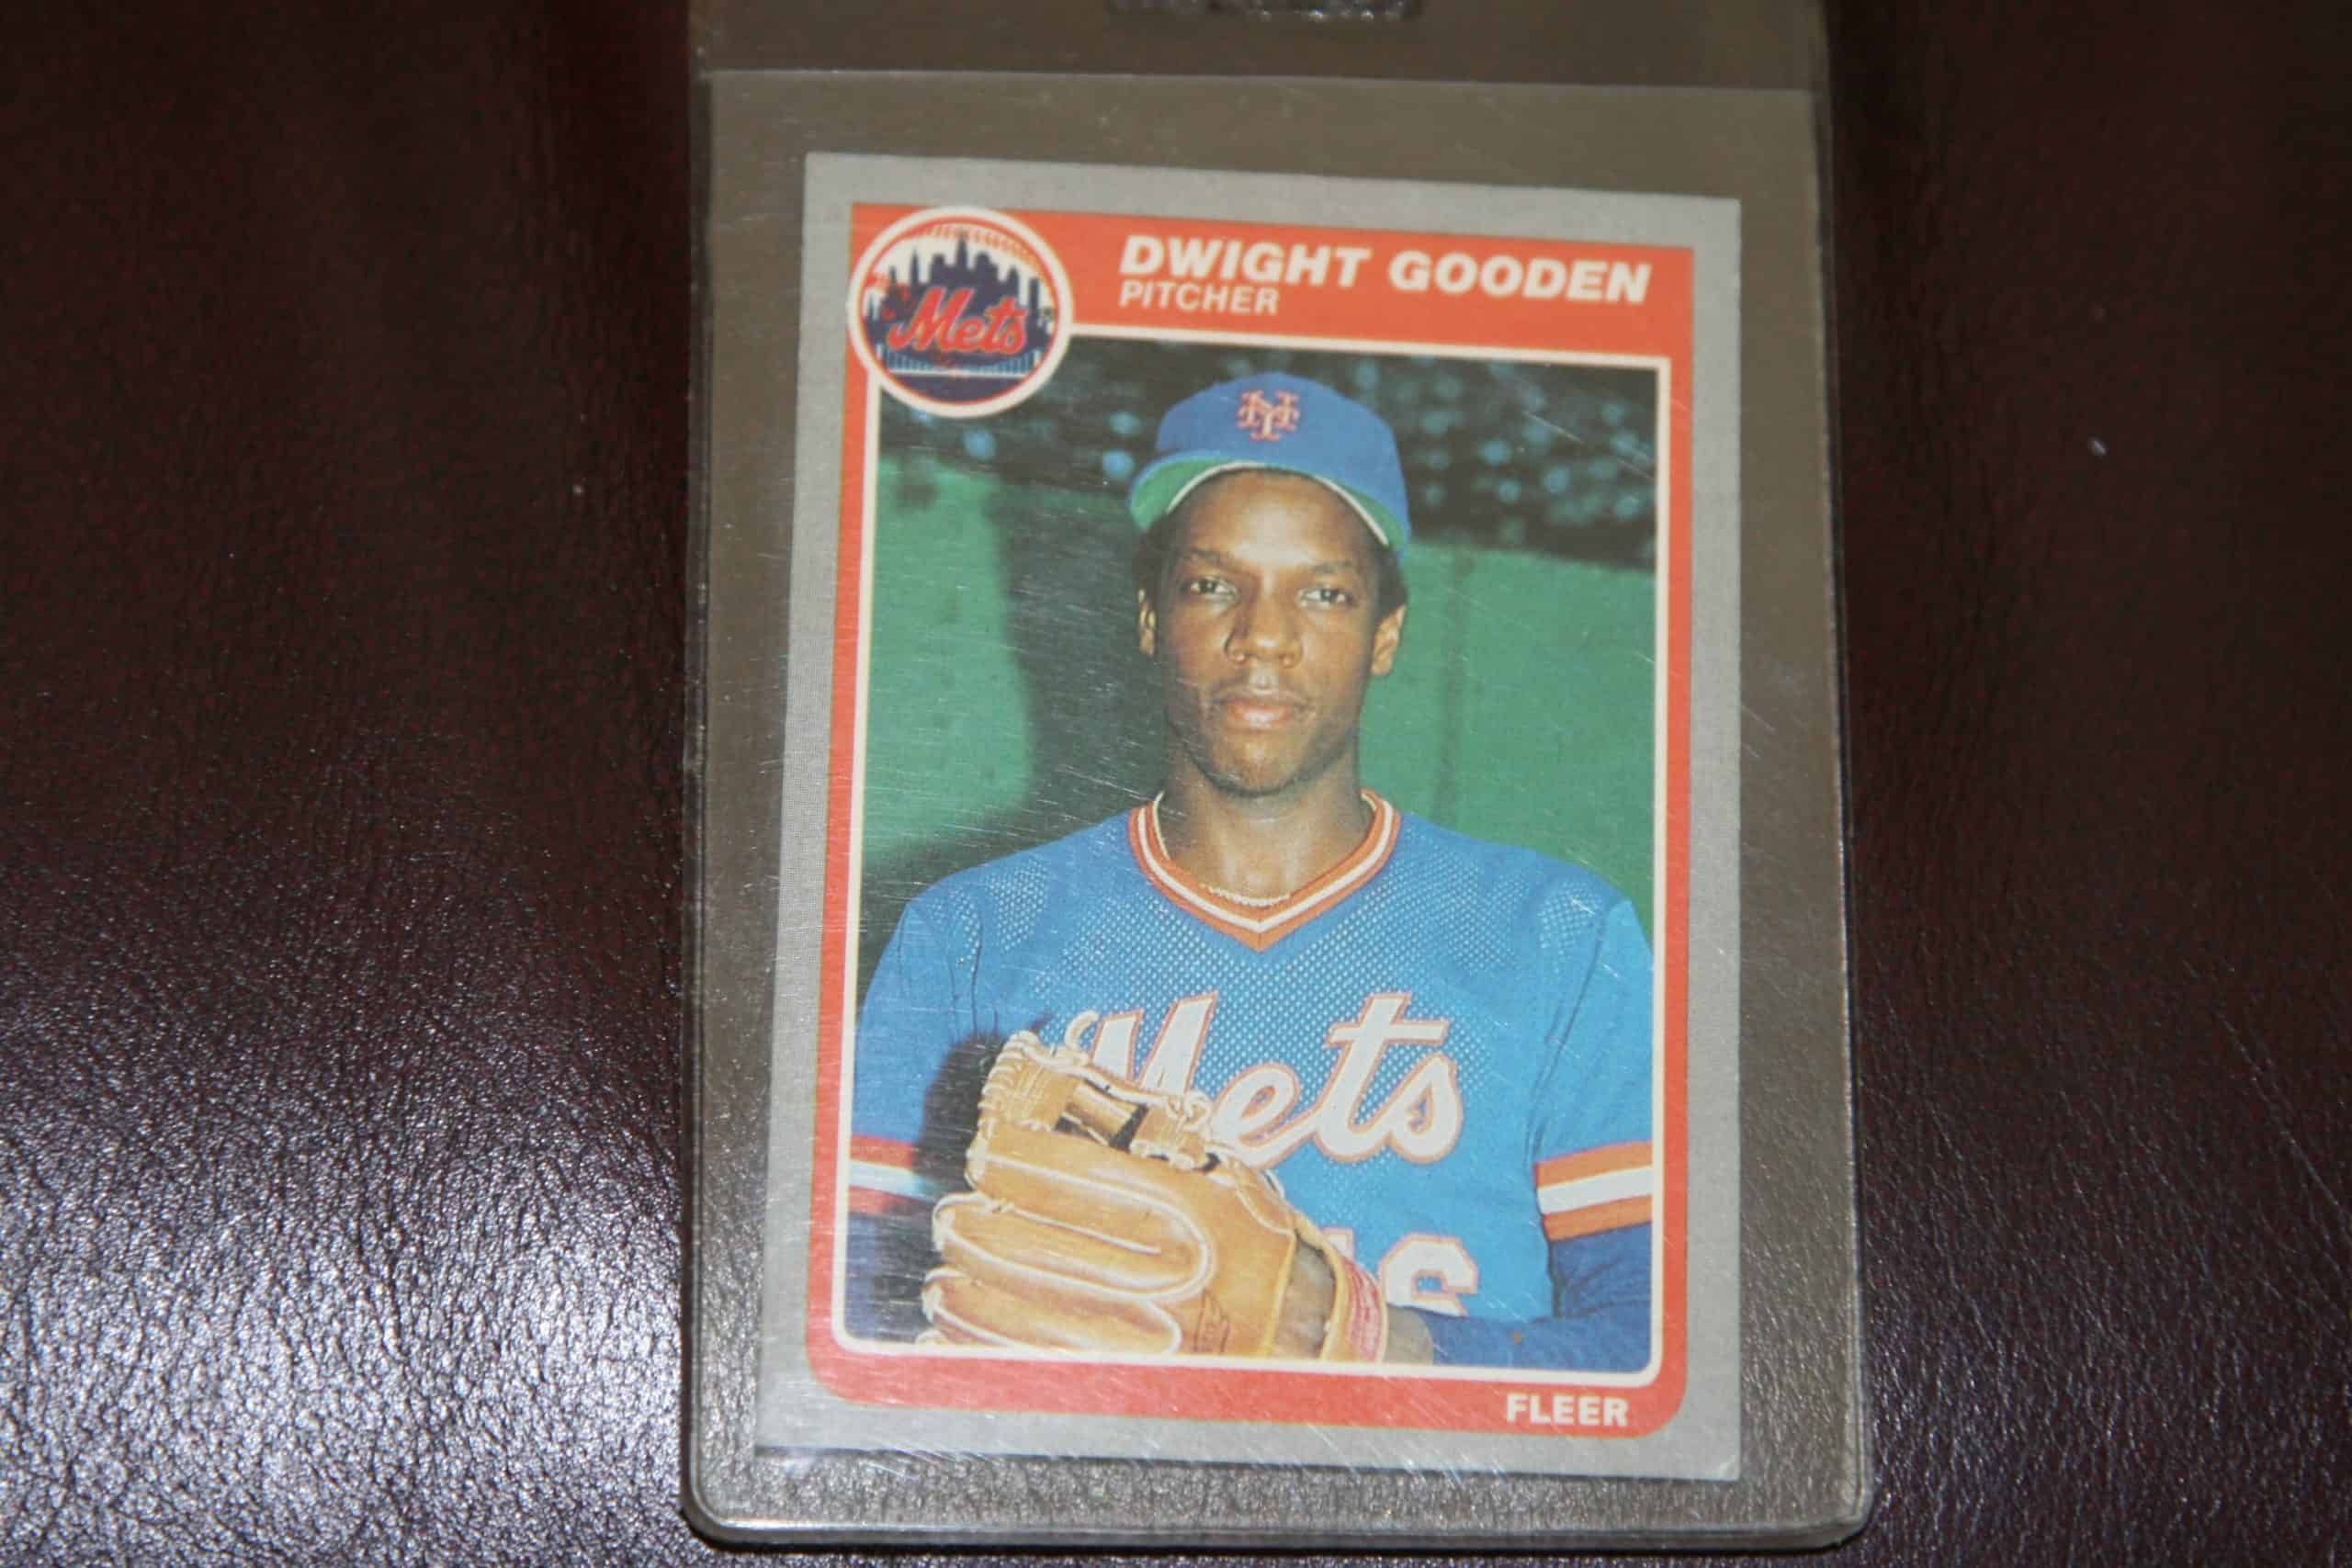 DWIGHT GOODEN FLEER ROOKIE CARD - Ace Rare Collectibles